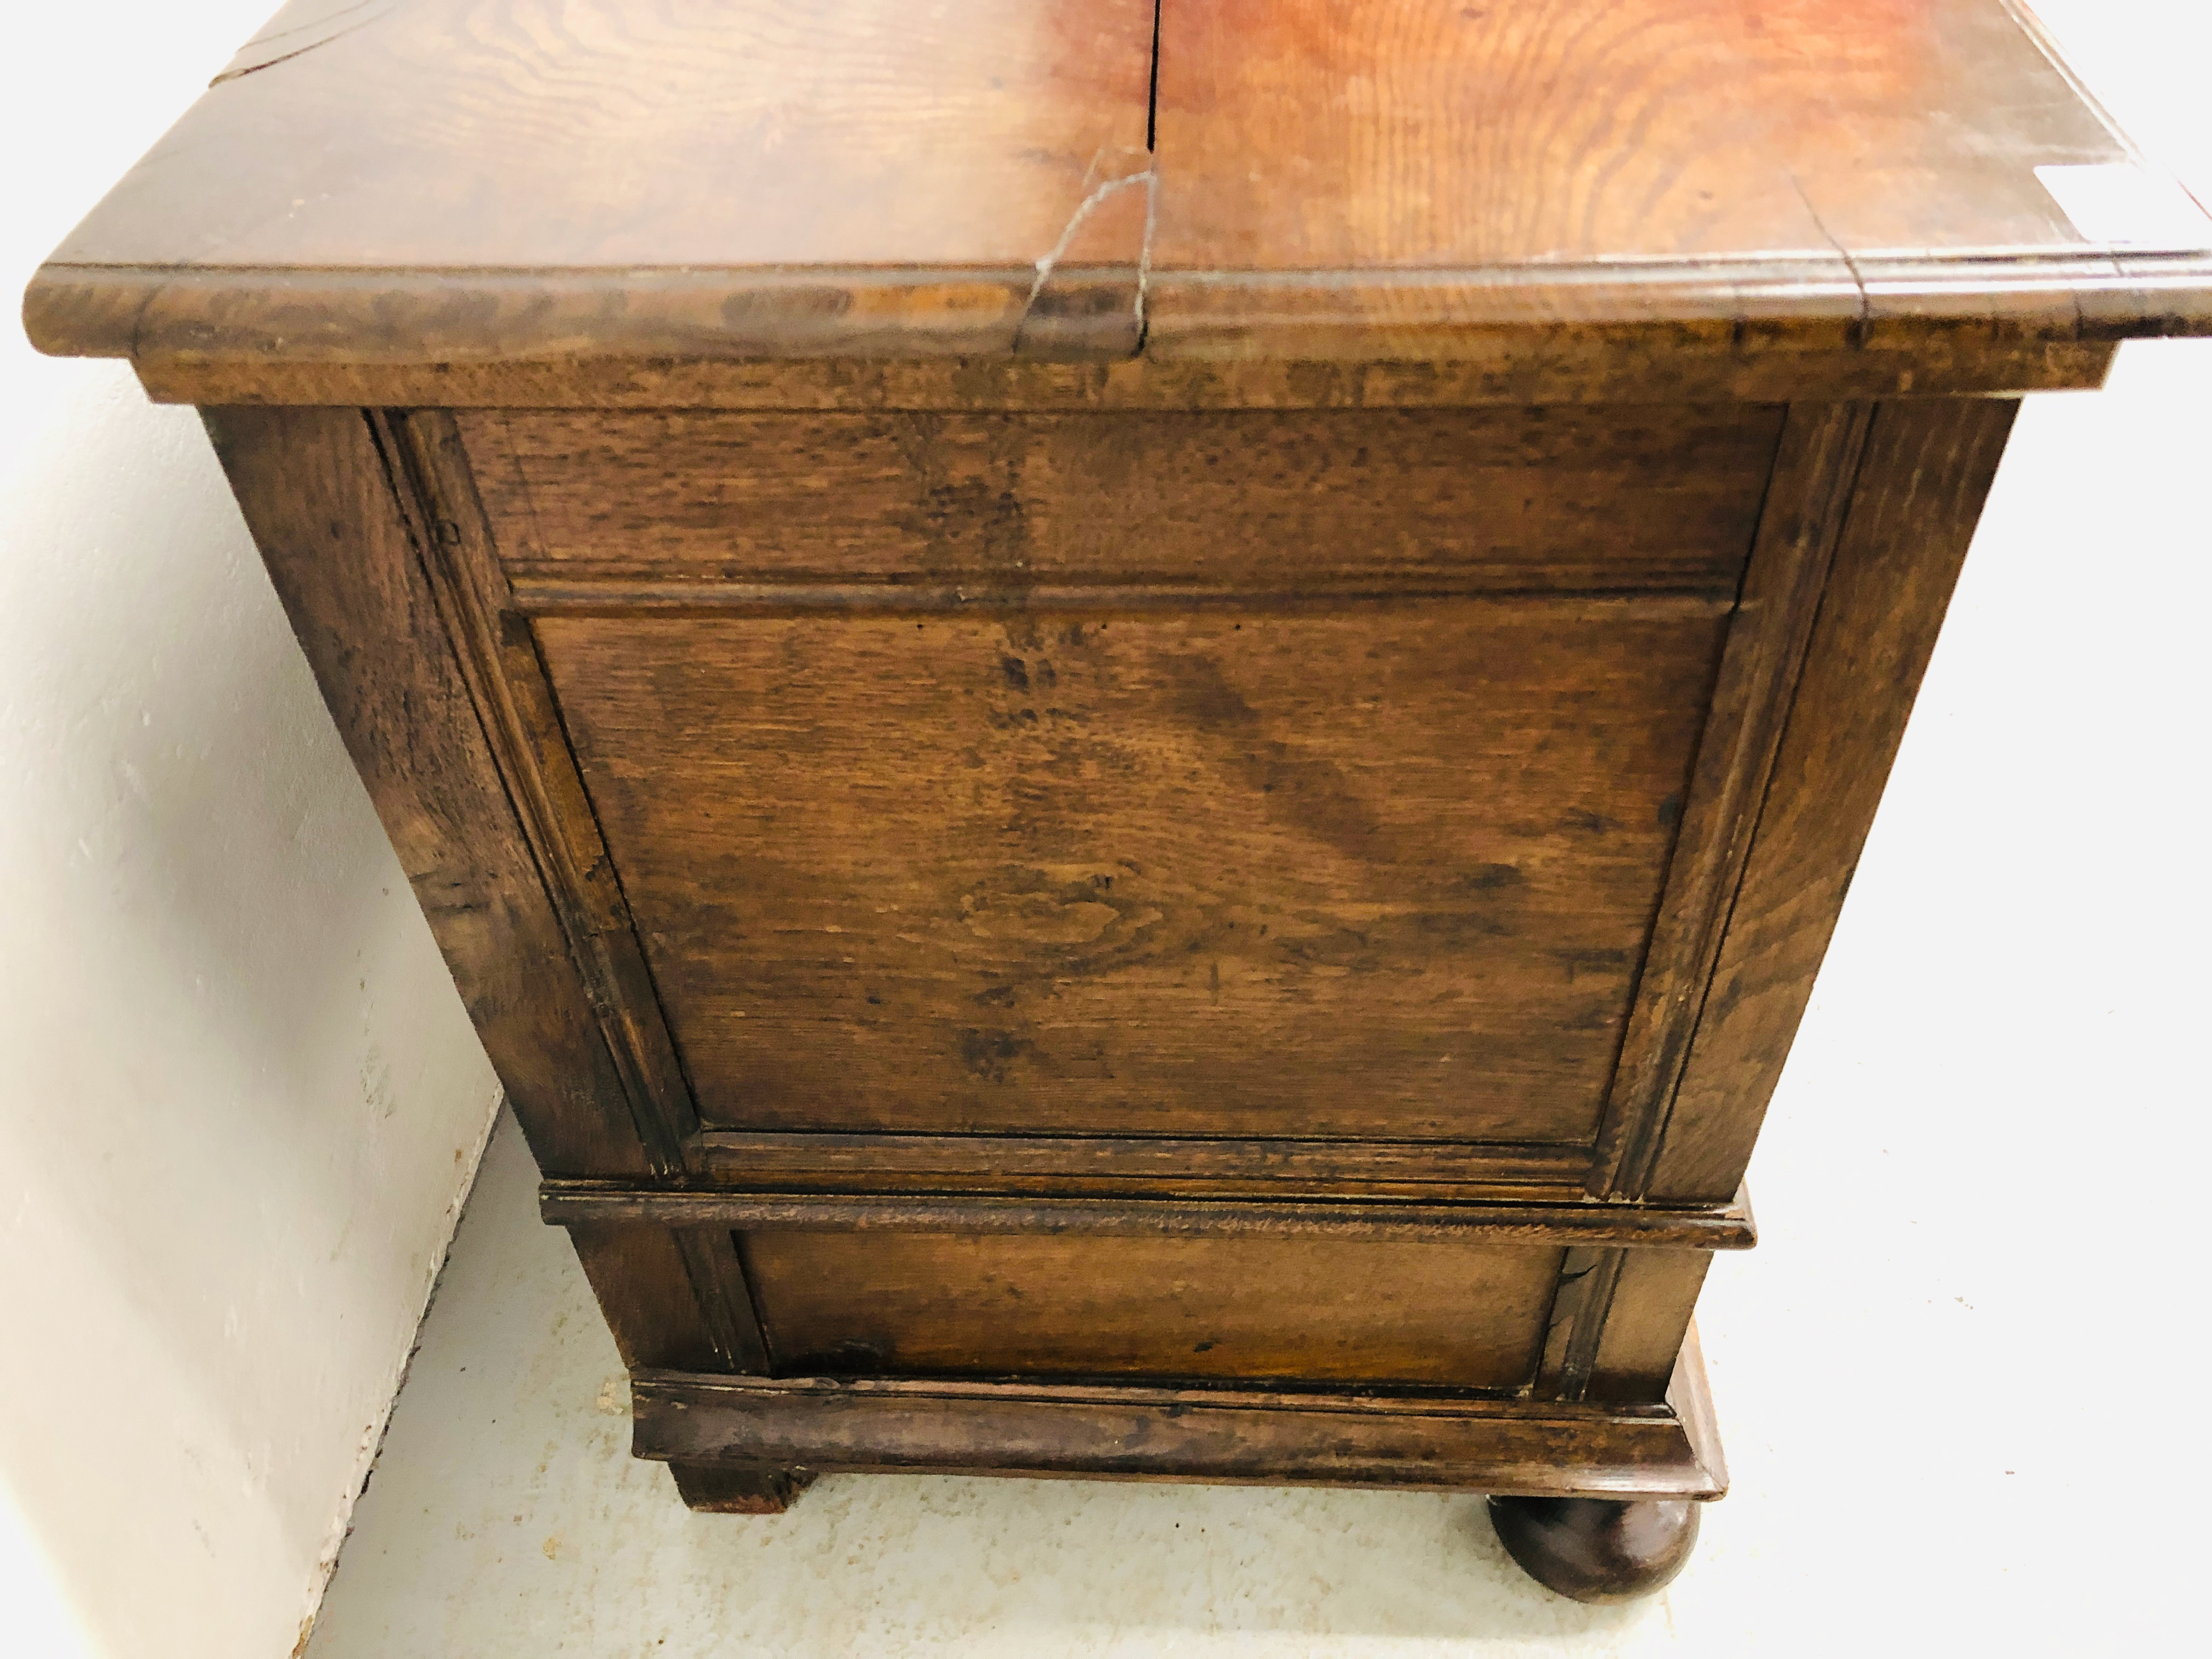 ANTIQUE OAK COFFER WITH TWO DRAWERS IN THE JACOBEAN STYLE - W 131CM. D 55CM. H 79CM. - Image 5 of 12